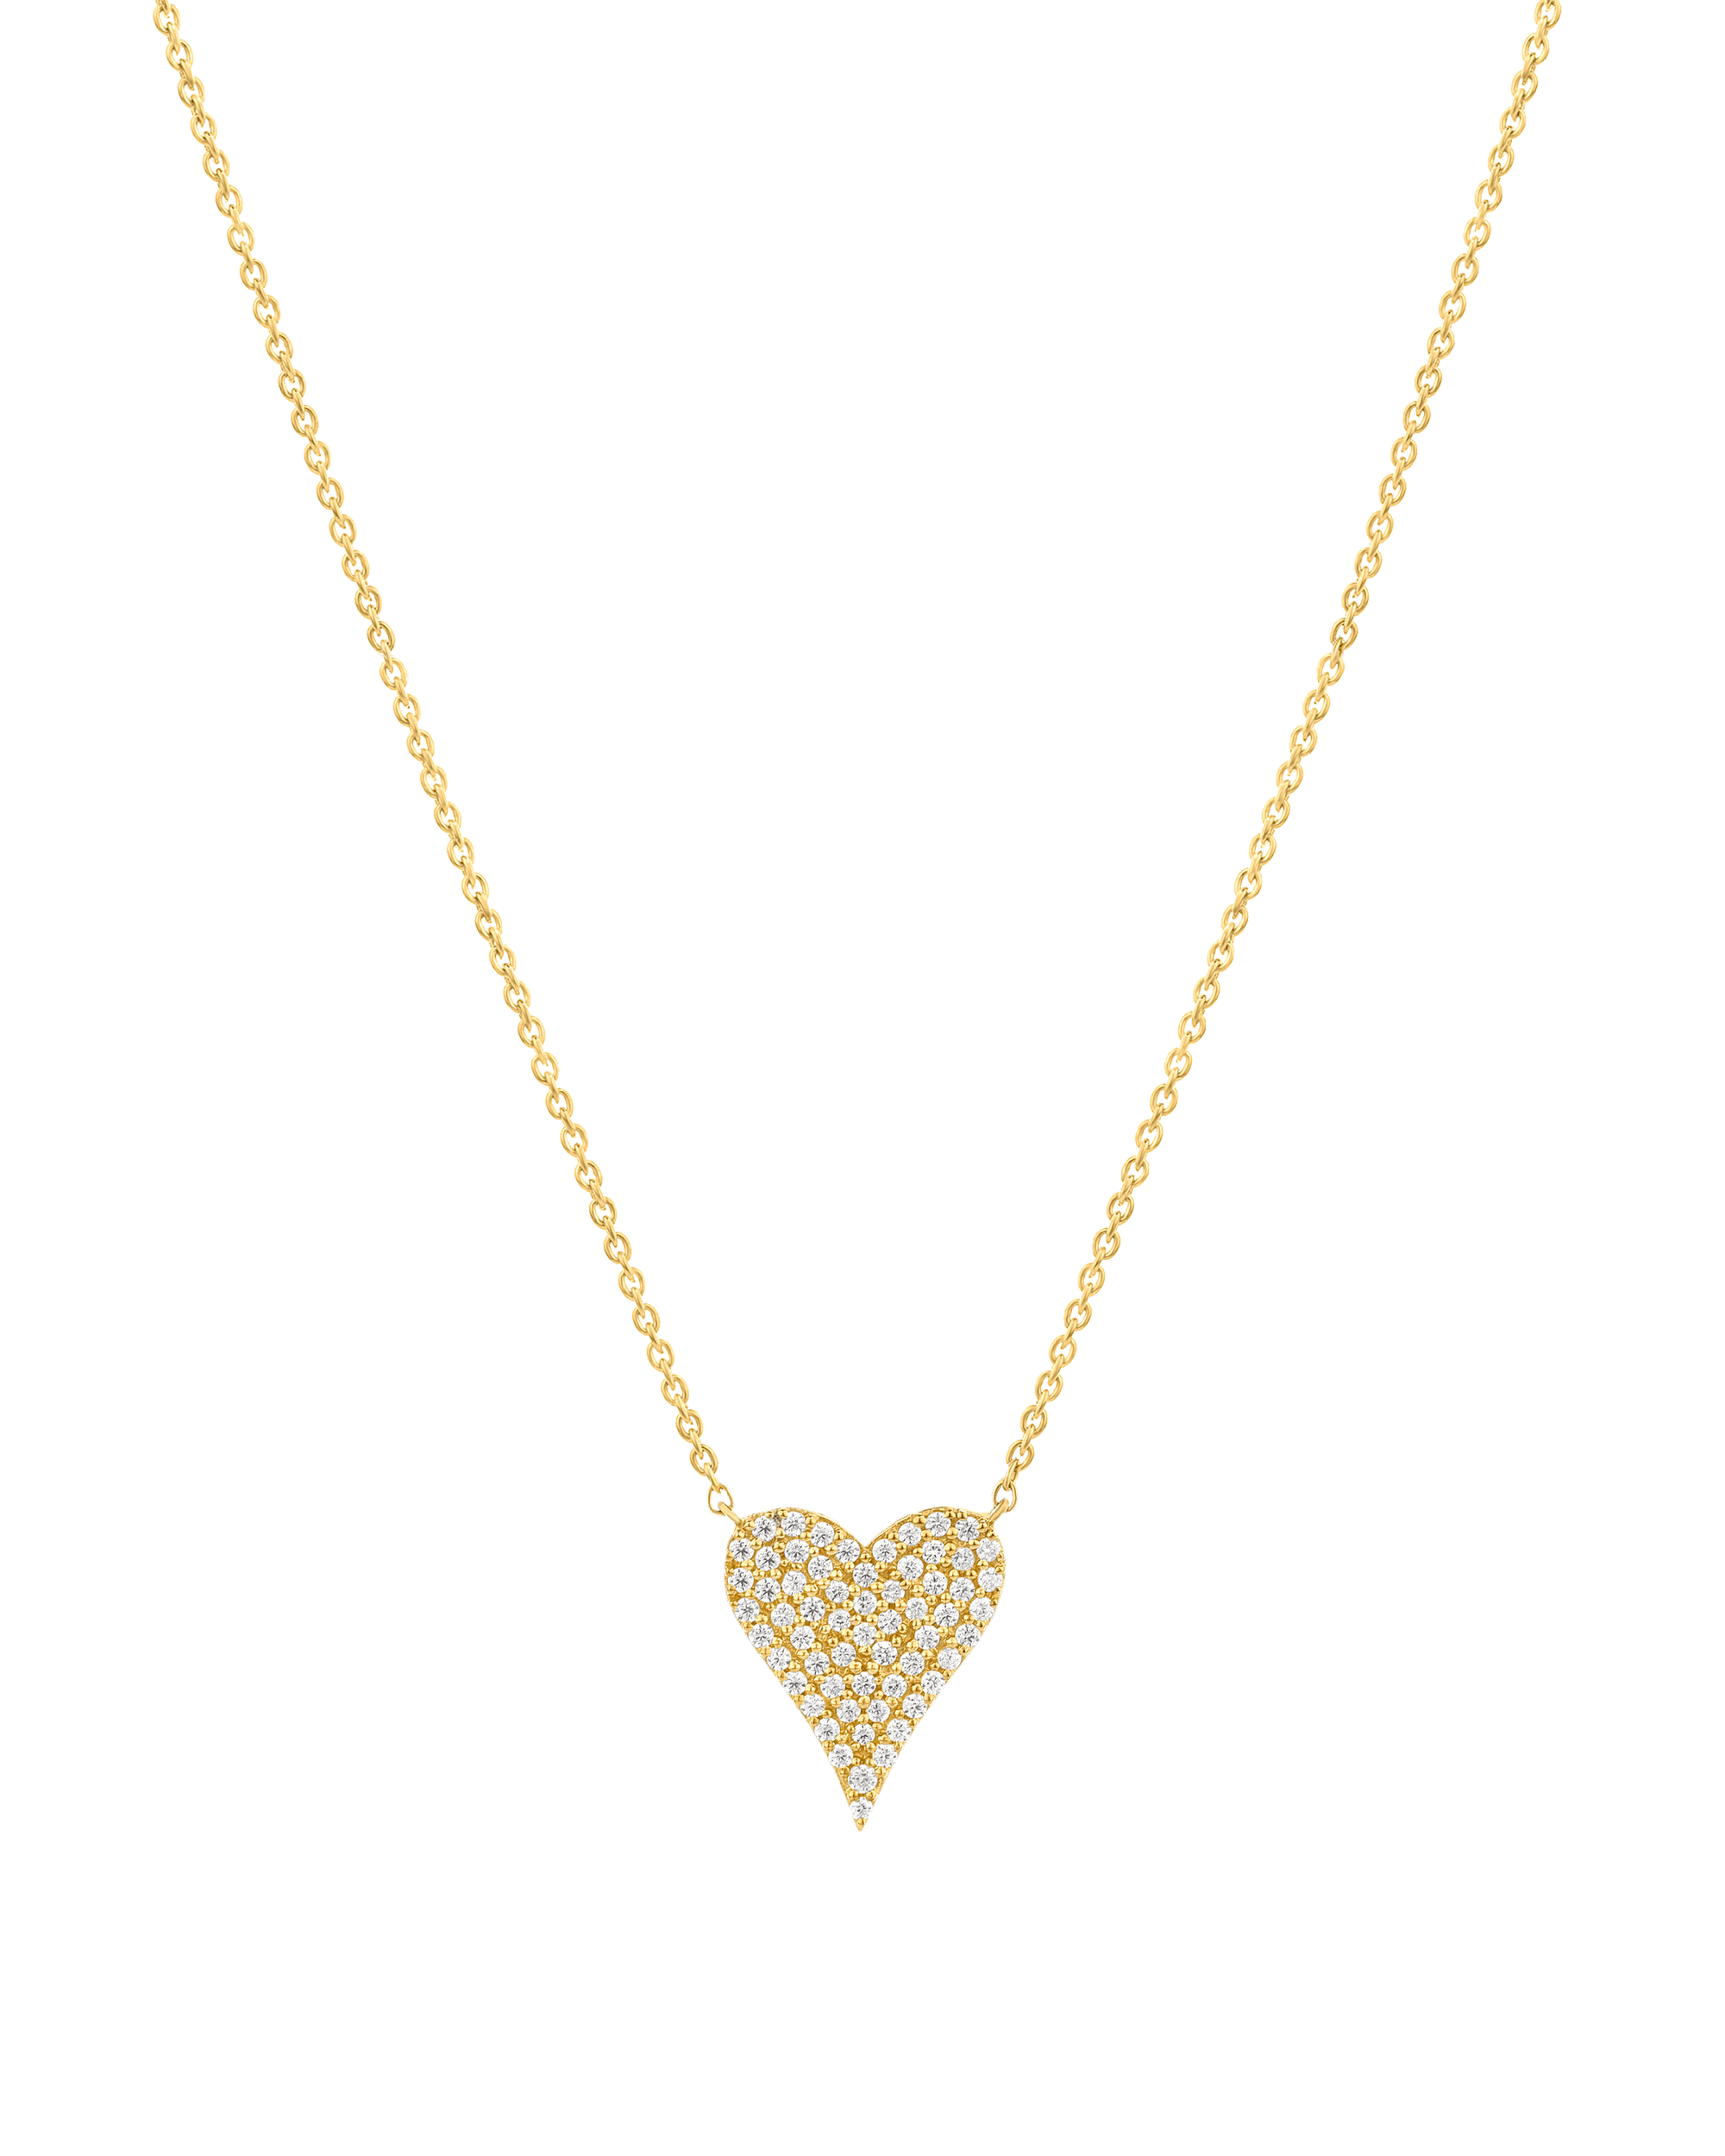 Medium Diamond Paved Heart Necklace - 14K Yellow Gold Necklaces magal-dev 